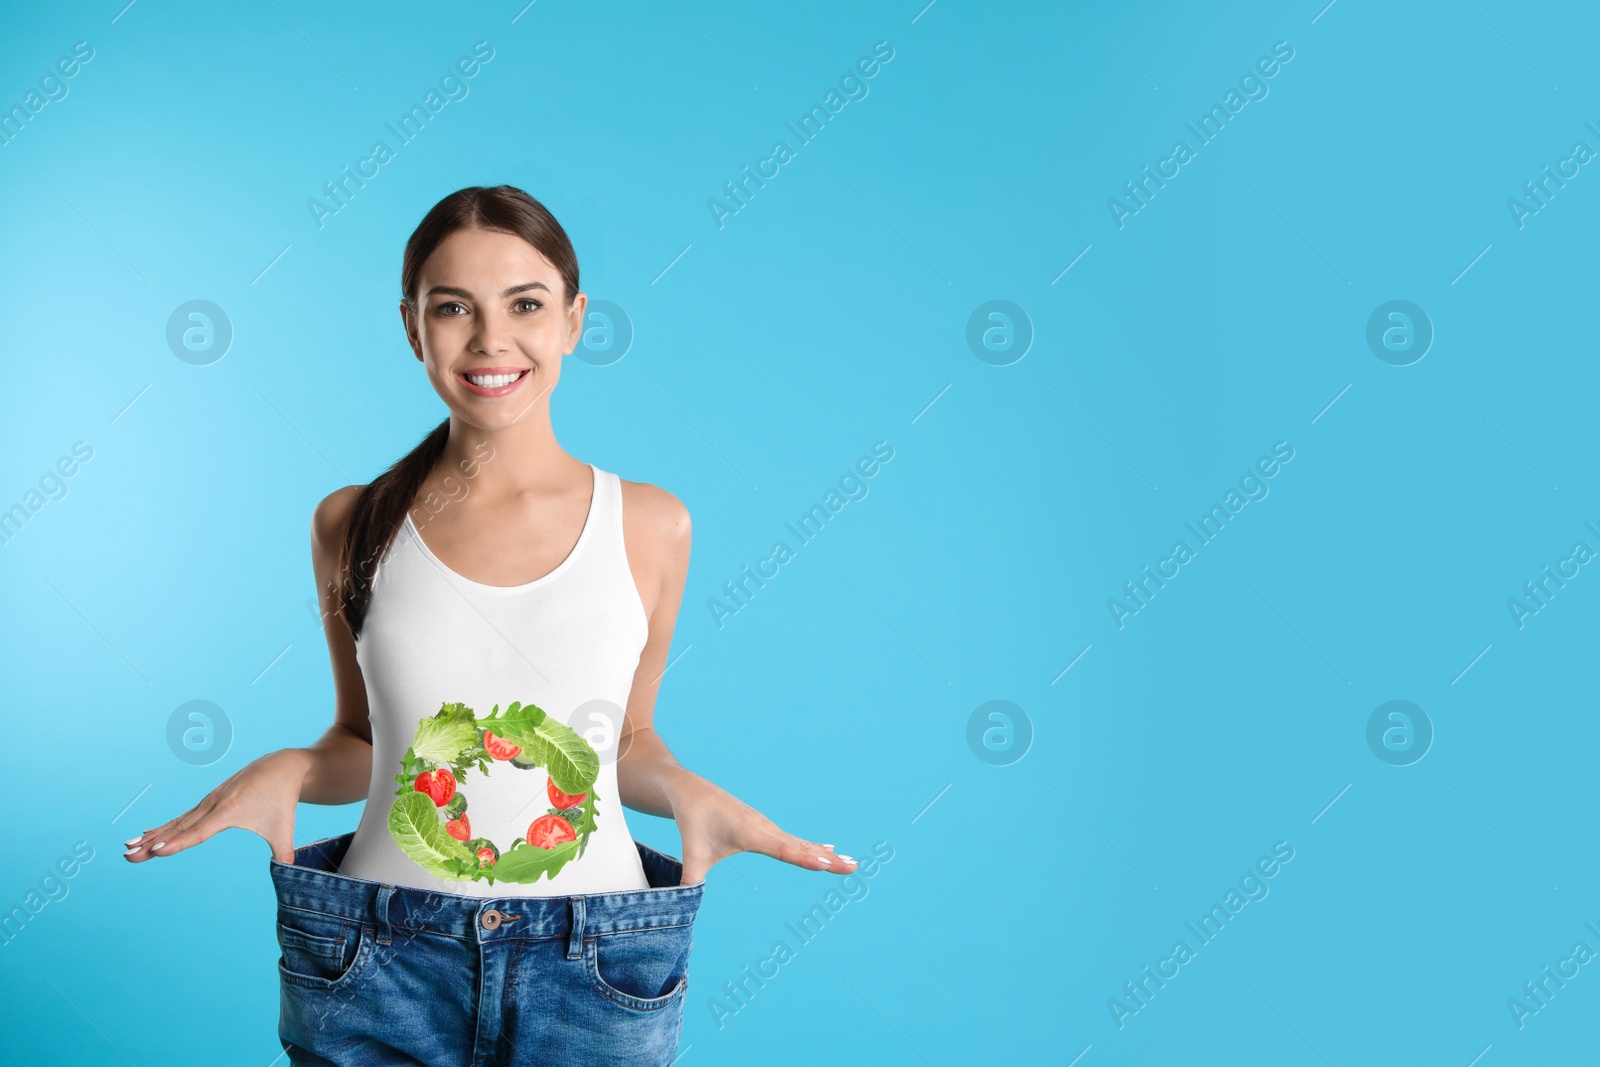 Image of Slim young woman wearing oversized jeans and images of vegetables on her belly against light blue background. Healthy eating